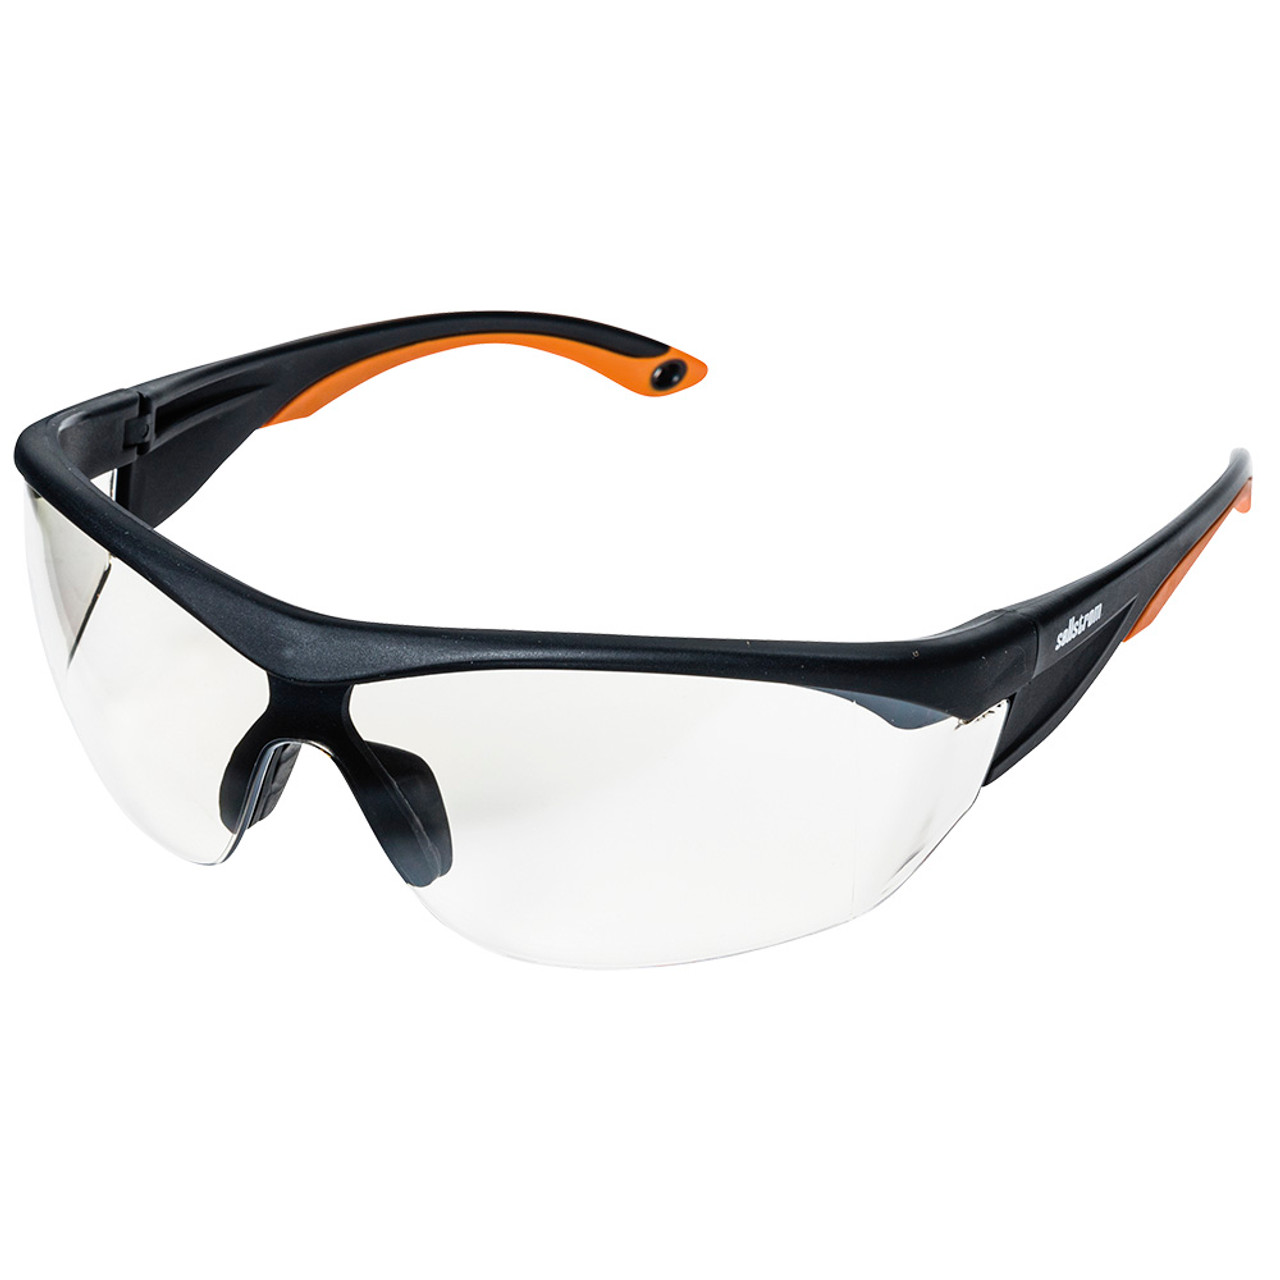 Sellstrom® XM320 Series Hard Coated Wrap Around Safety Glasses - Indoor/Outdoor - Orange-Black Arms  S71402